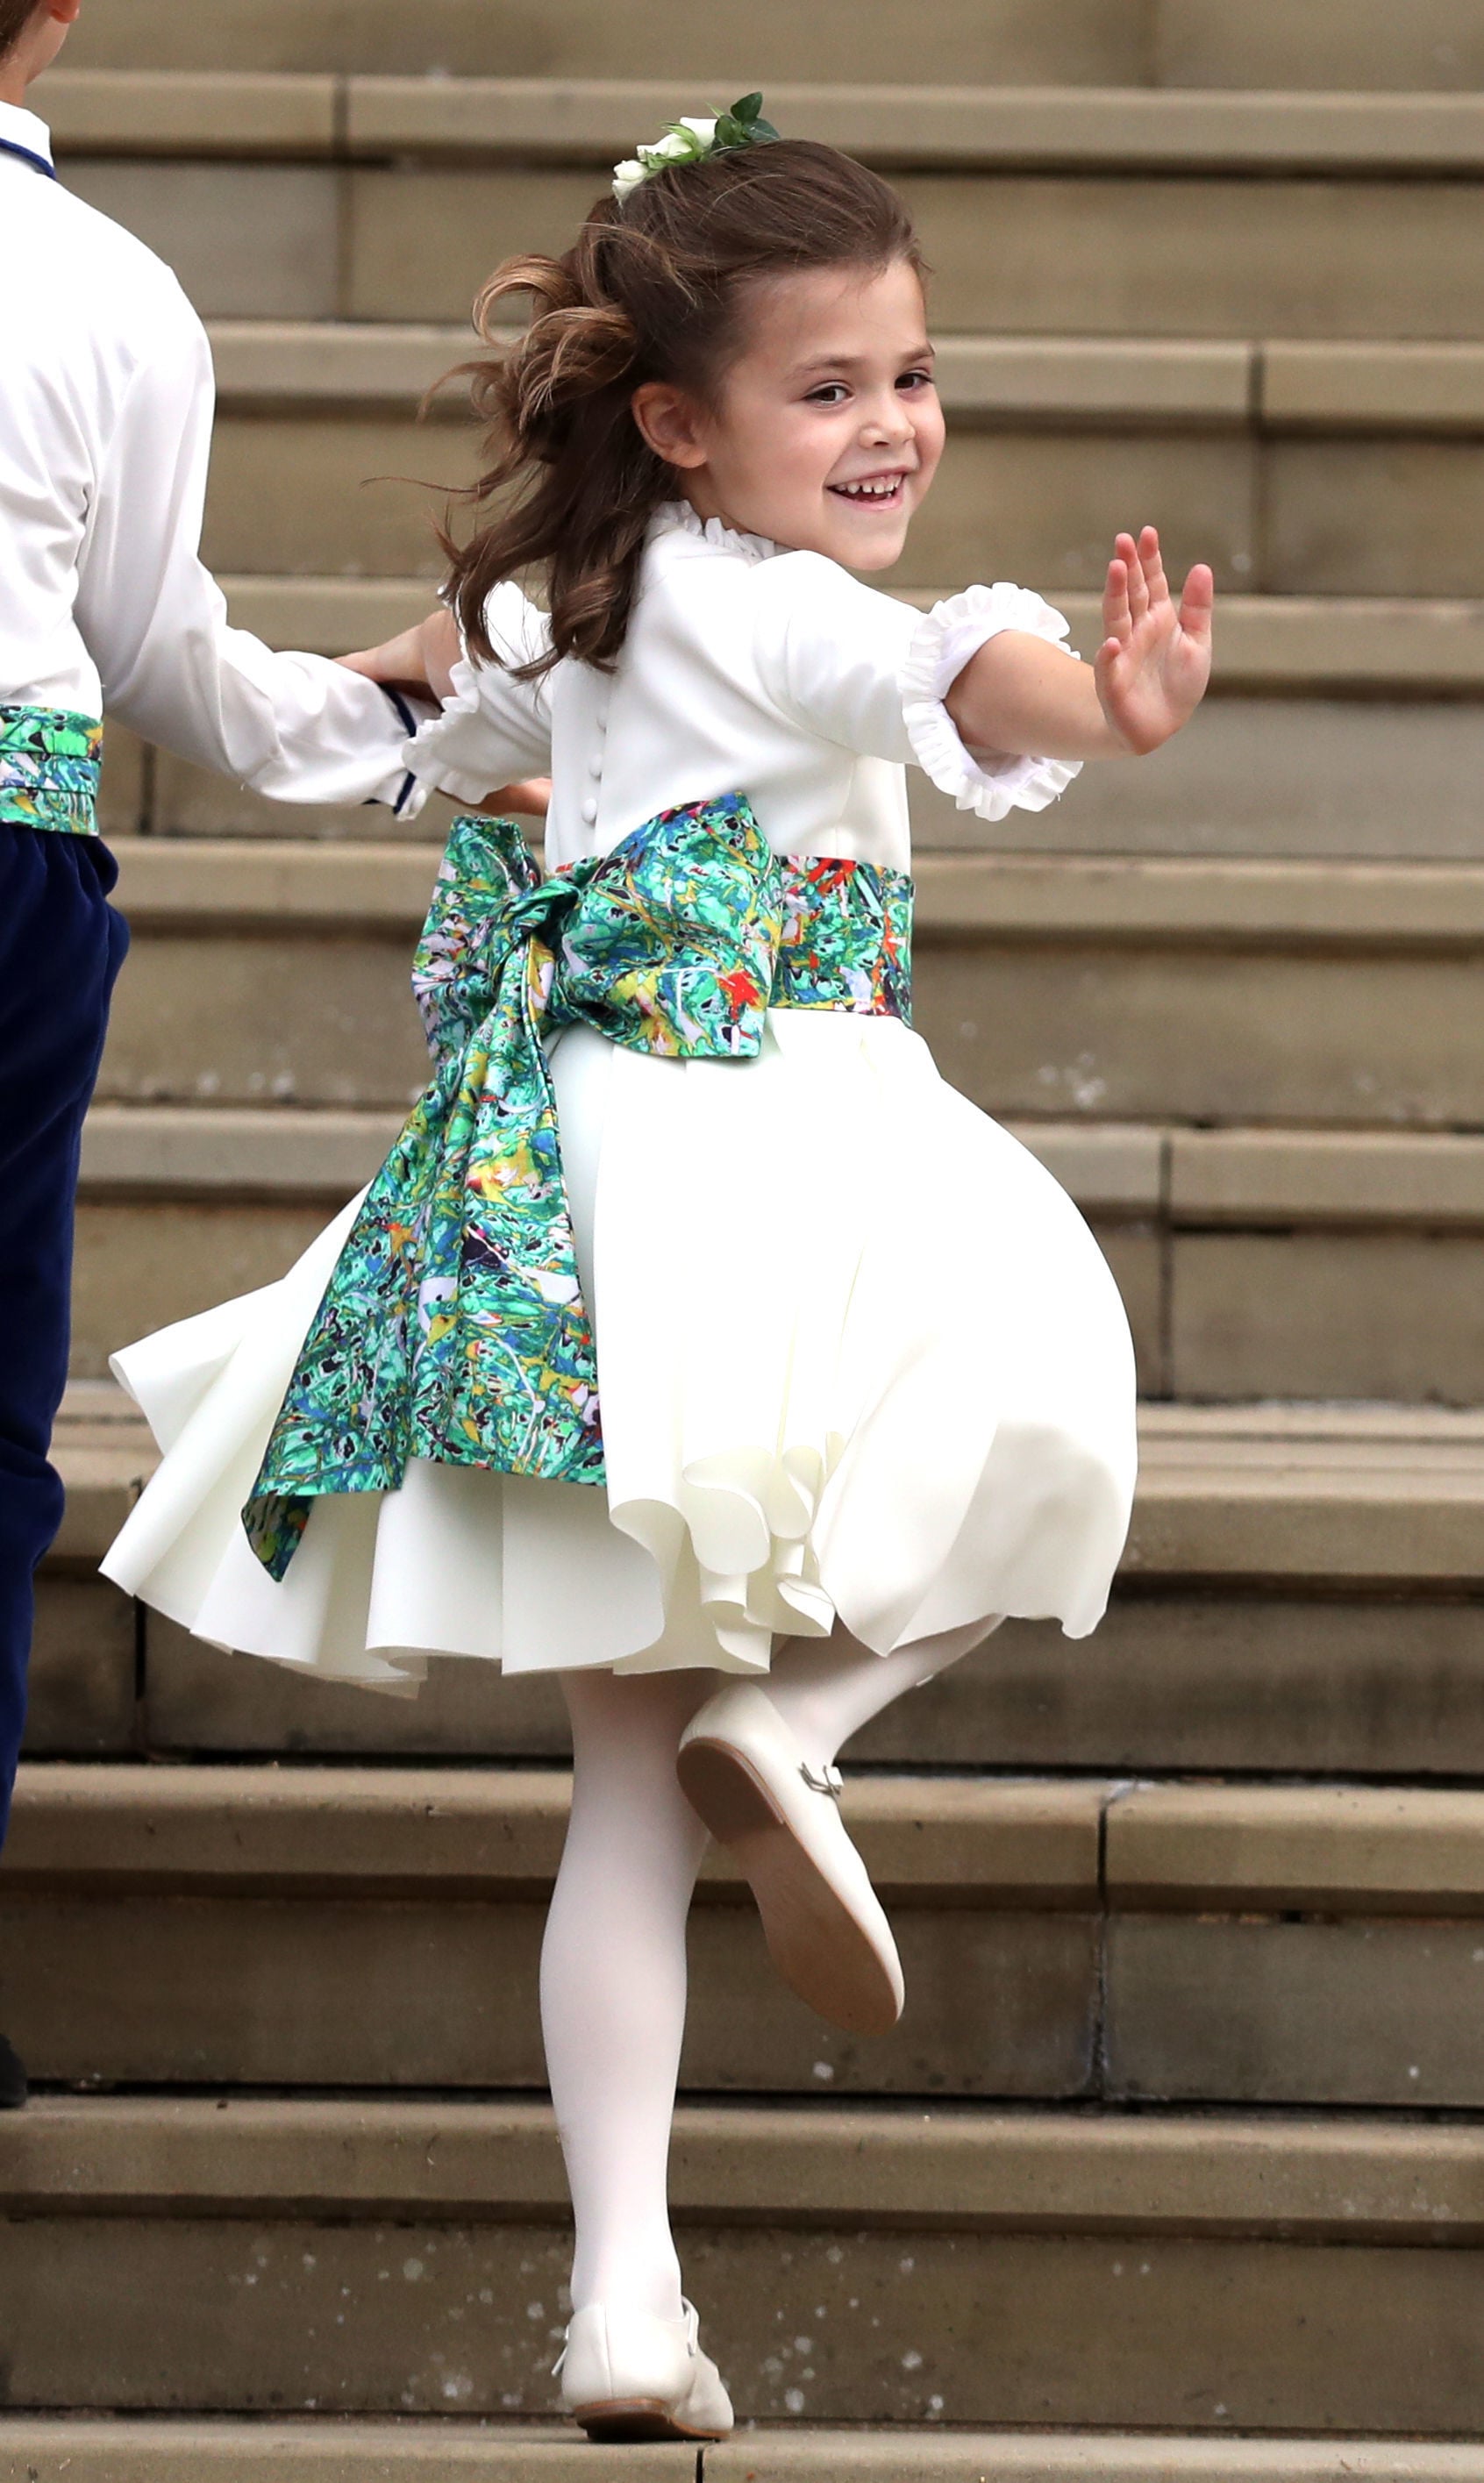 Bridesmaid Theodora Williams, daughter of Robbie Williams and Ayda Field, waves a she arrives to attend the wedding of Britain's Princess Eugenie of York to Jack Brooksbank at St George's Chapel, Windsor Castle, in Windsor, on October 12, 2018. (Photo by Steve Parsons / POOL / AFP)        (Photo credit should read STEVE PARSONS/AFP via Getty Images)